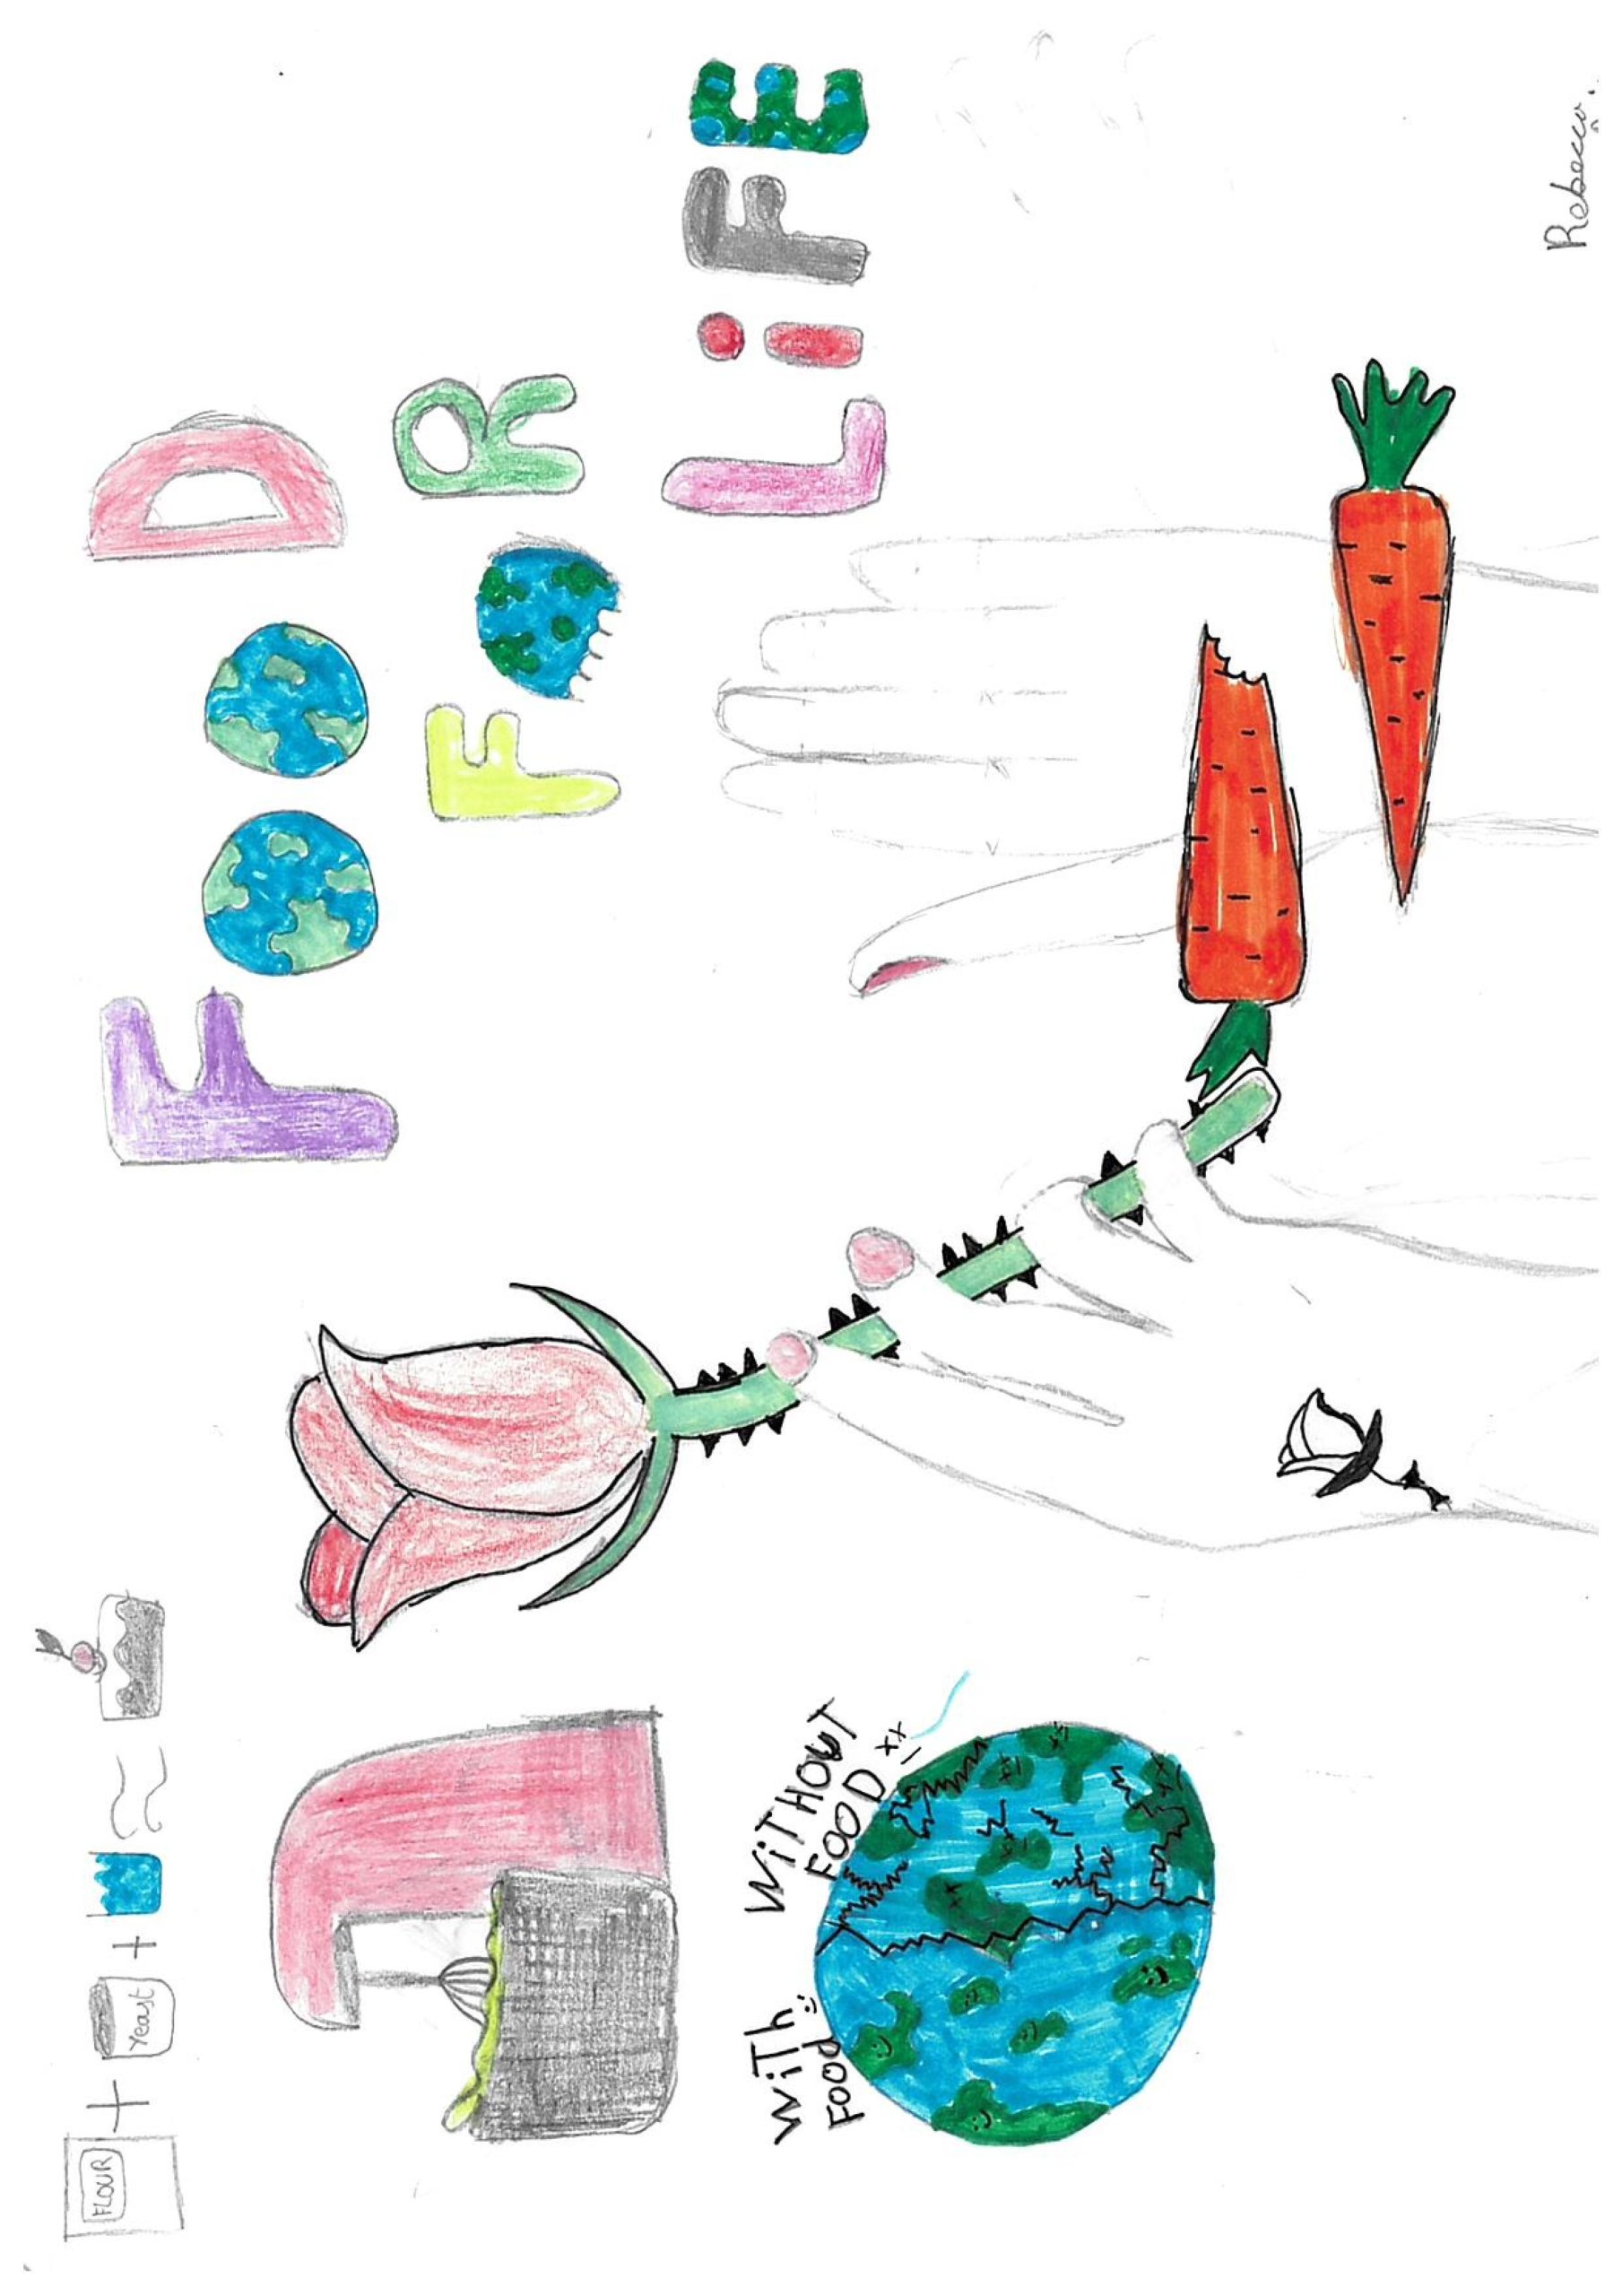 Hand drawn colourful image of two hands, one holding a rose, with the words "Food for life" with drawings of carrots, a whisk, and a drawing of planet earth split in half with one side labelled "With food" and the other "without food"